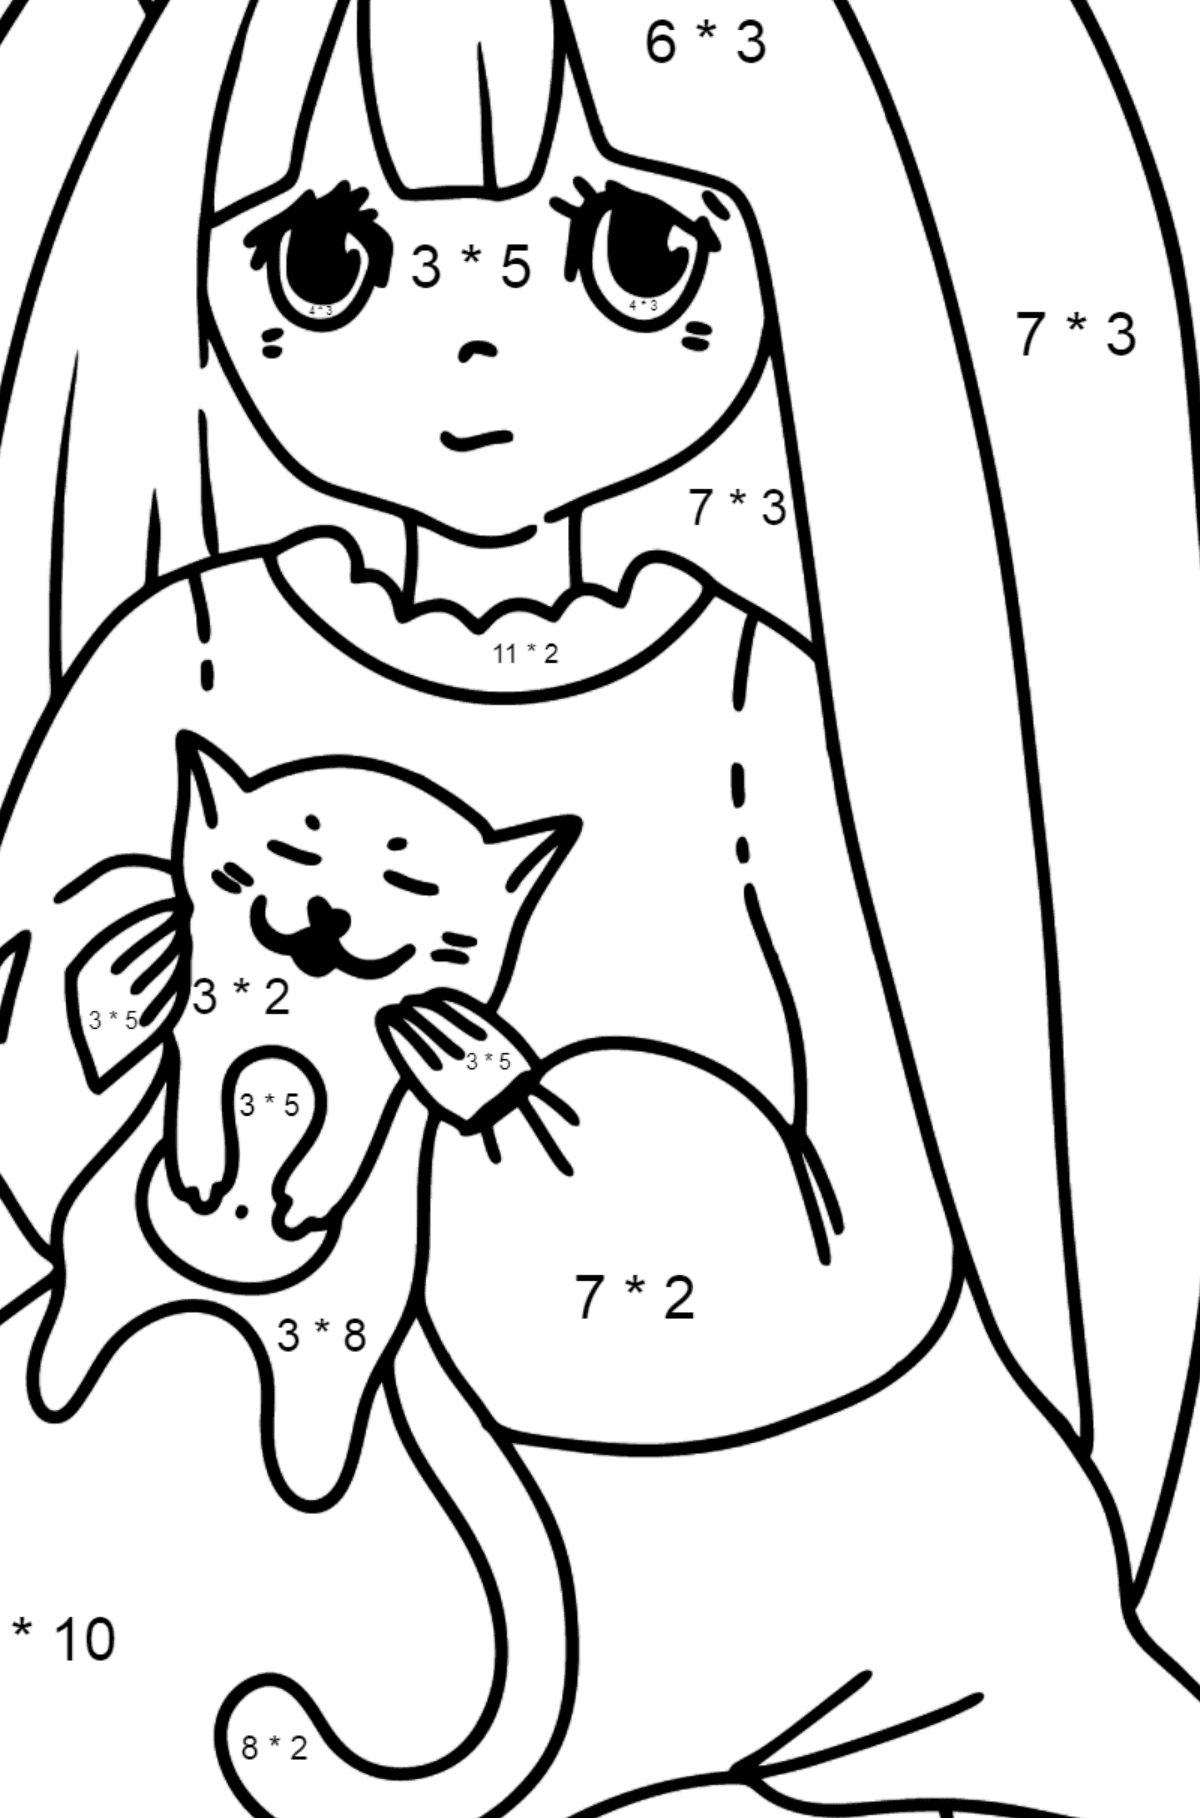 Anime Girl Playing with Kitten coloring page - Math Coloring - Multiplication for Kids